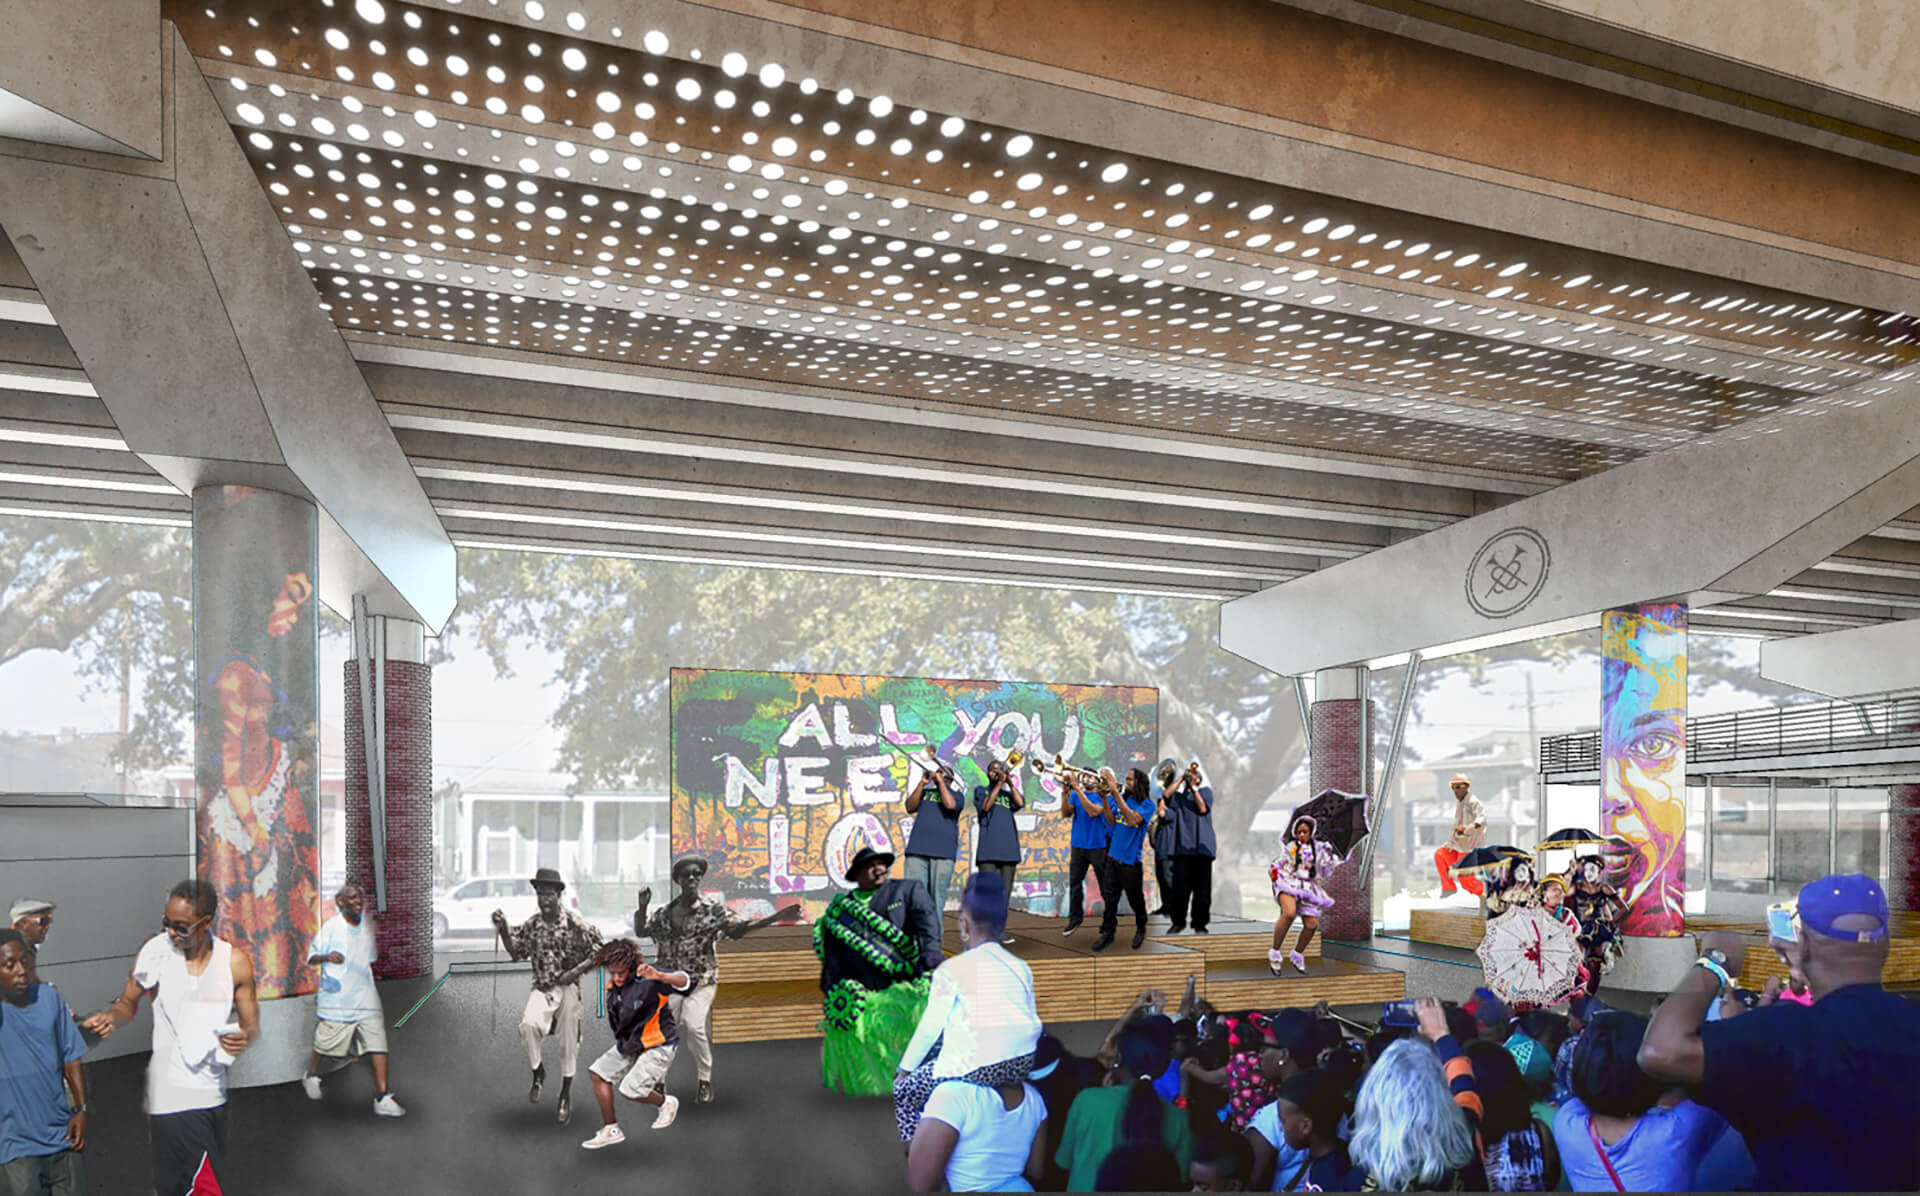 A digital rending of what a community event could look like under the overpass with a band, dancing, and performers